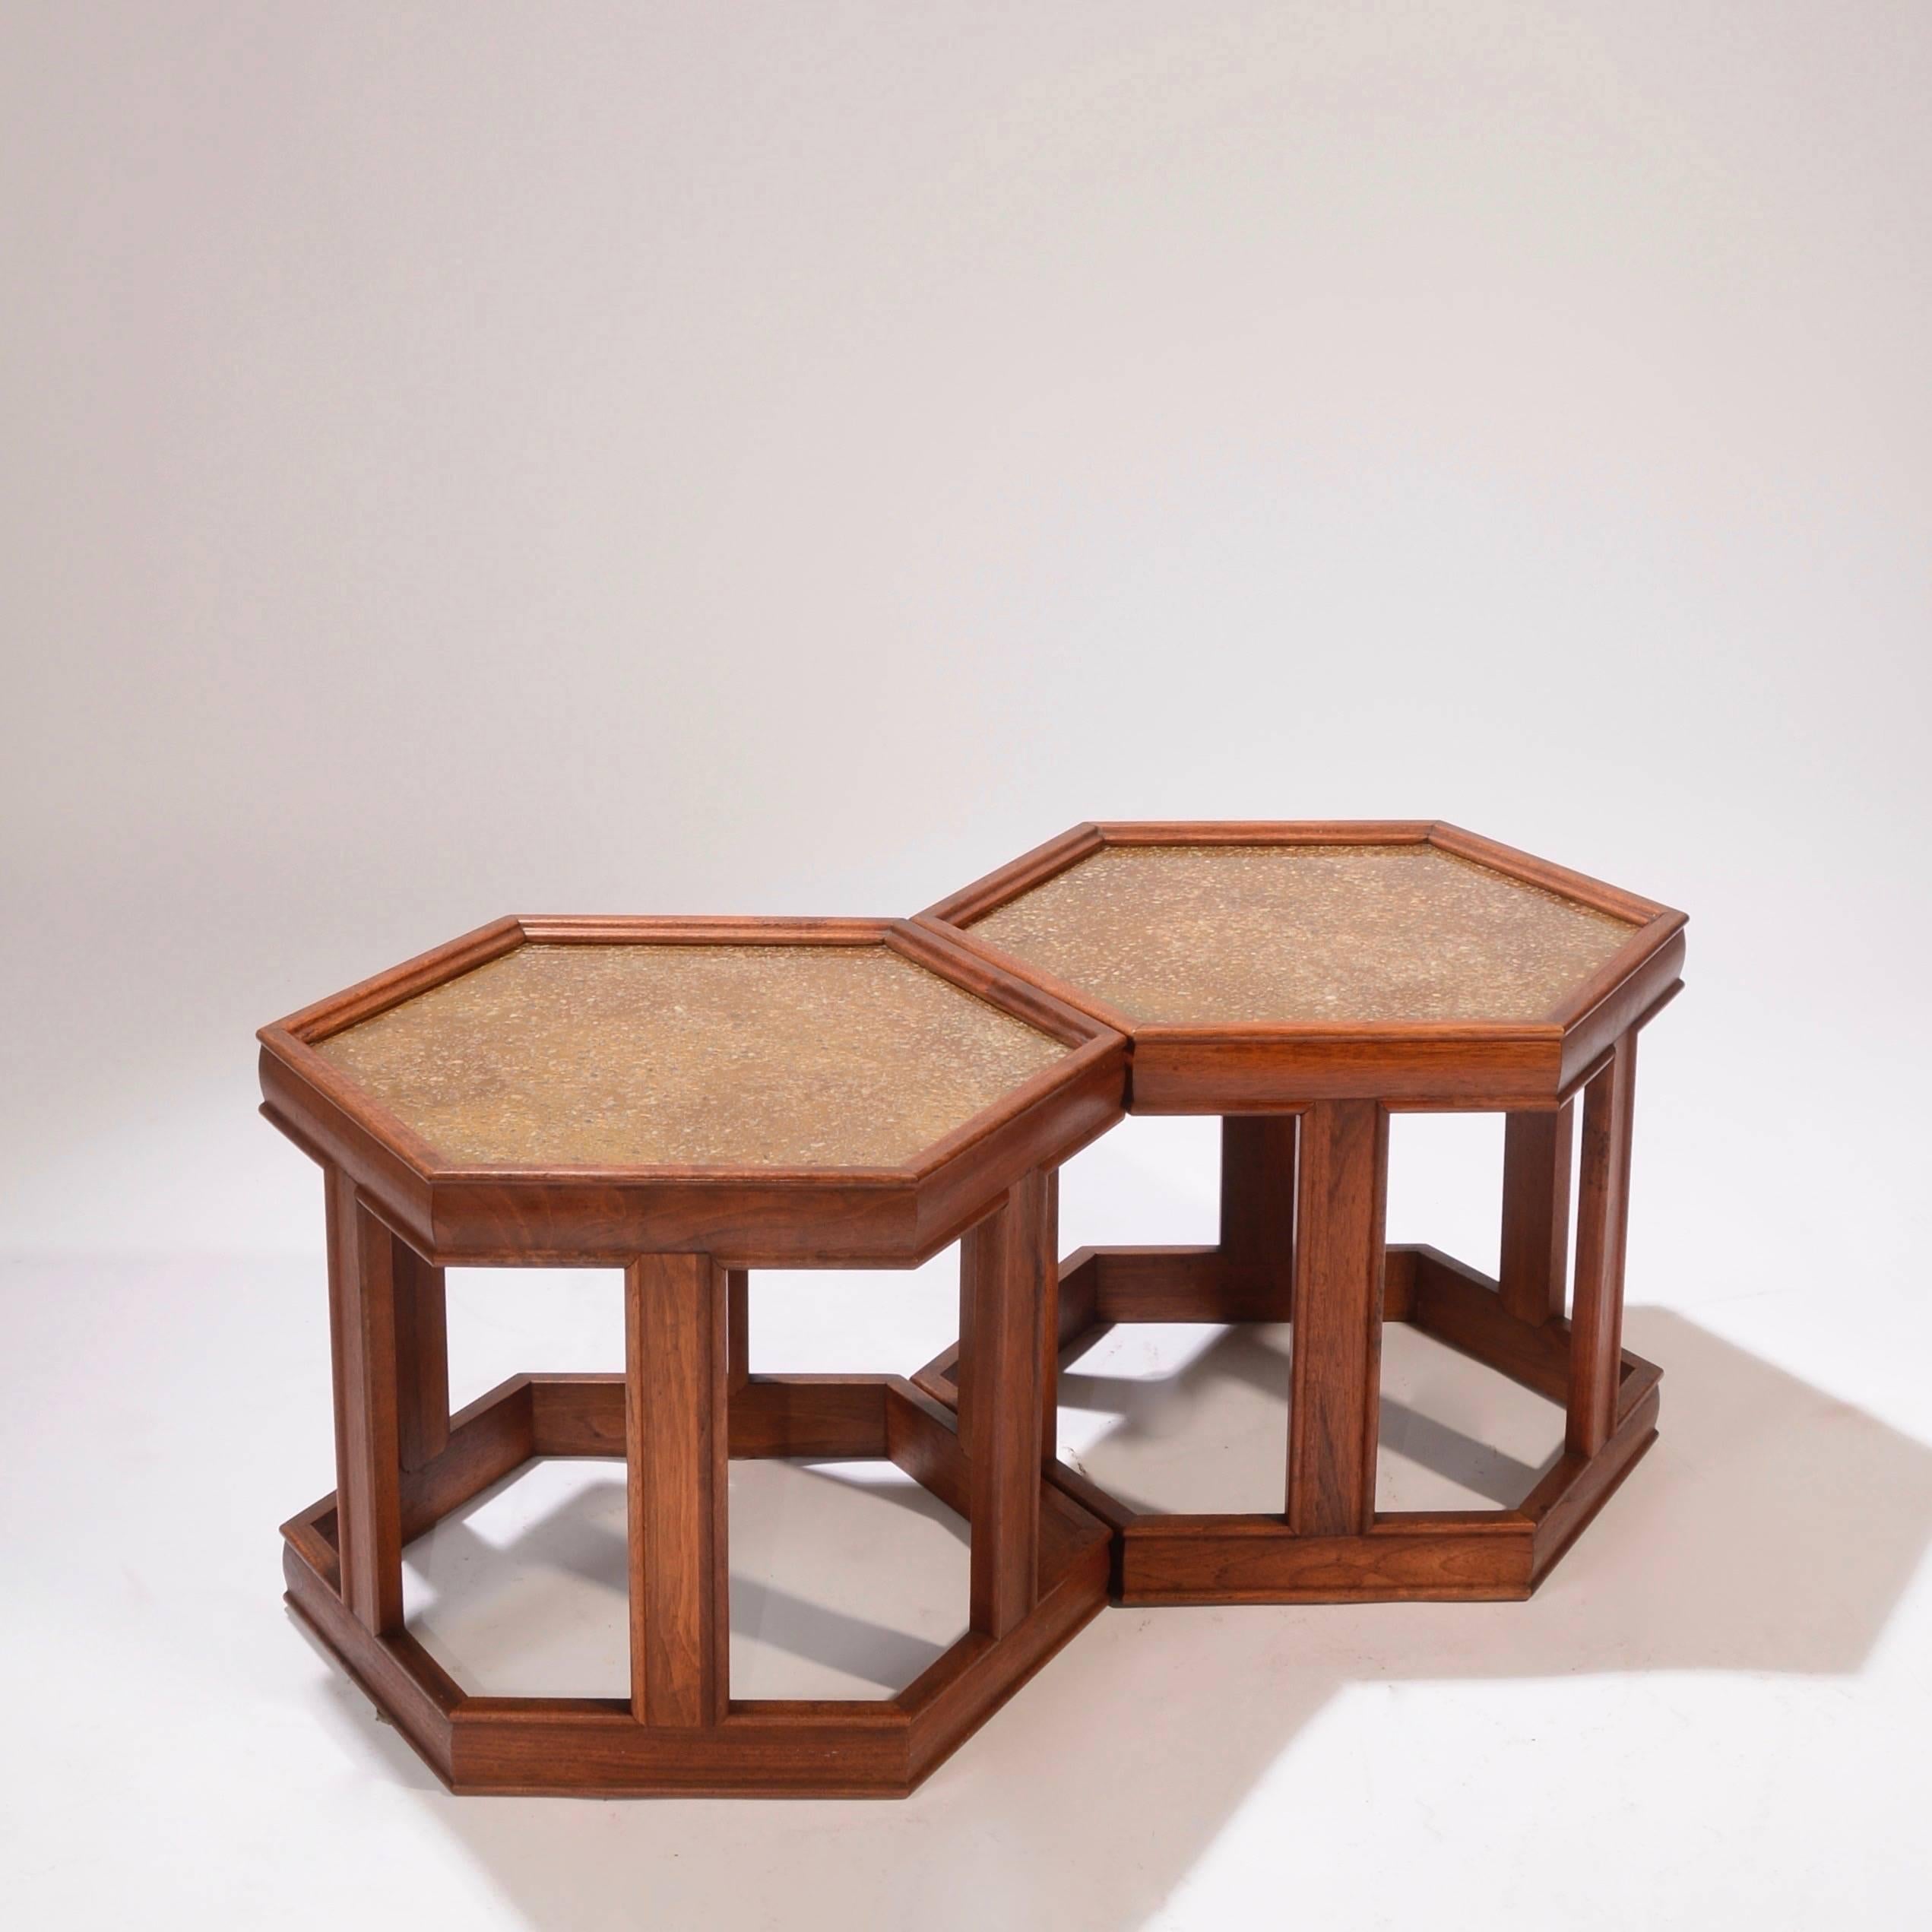 Set of two hexagonal John Keal for Brown Saltman tables. Frames are walnut with enamelled textured design under glass tops.